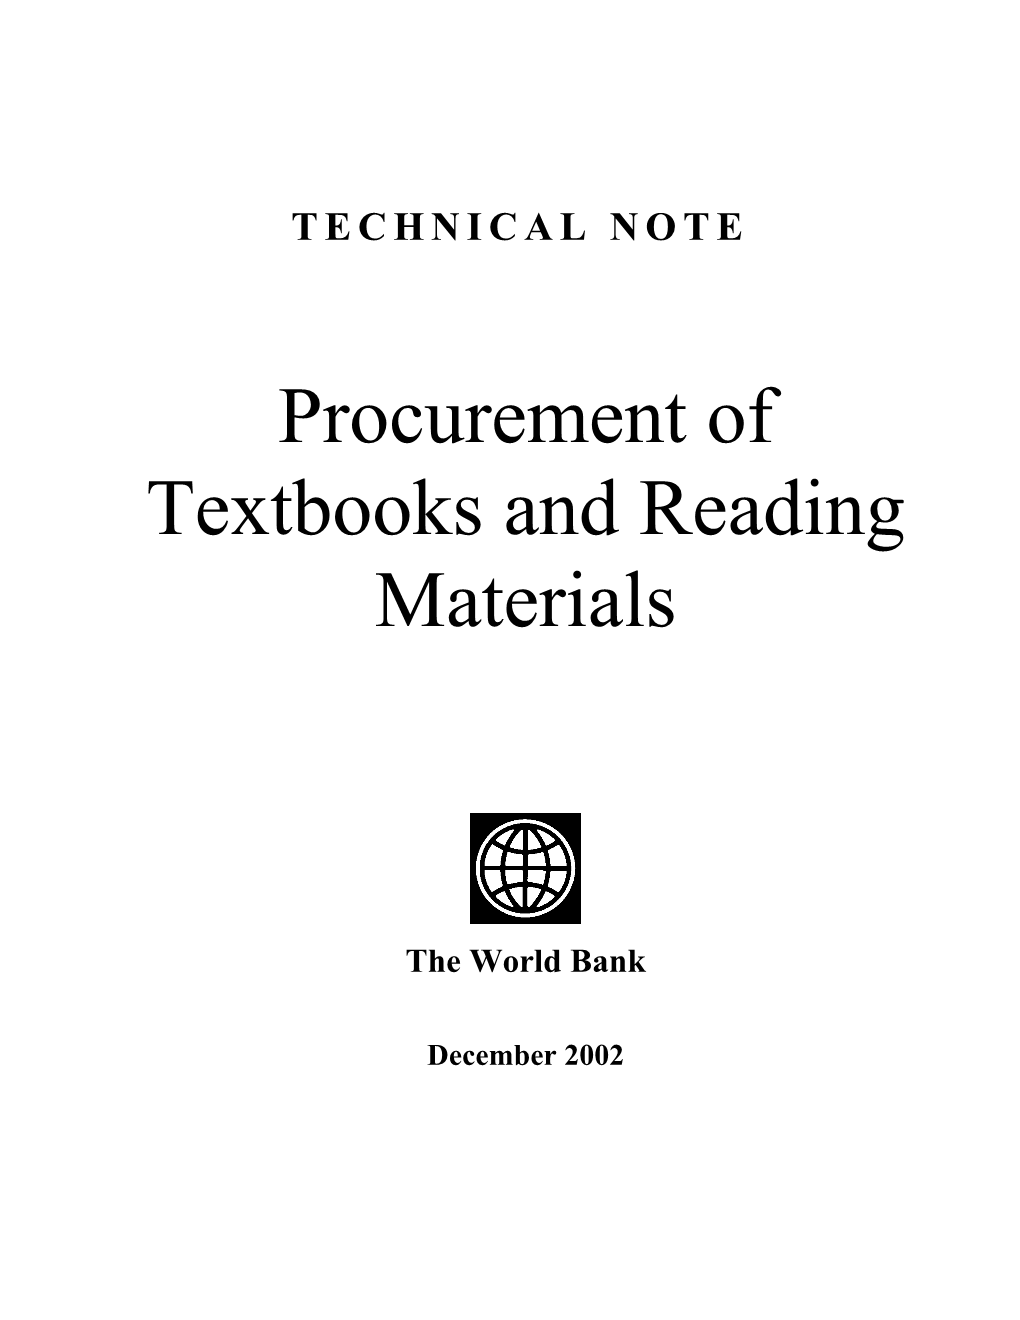 Technical Note for the Procurement of Textbooks 1